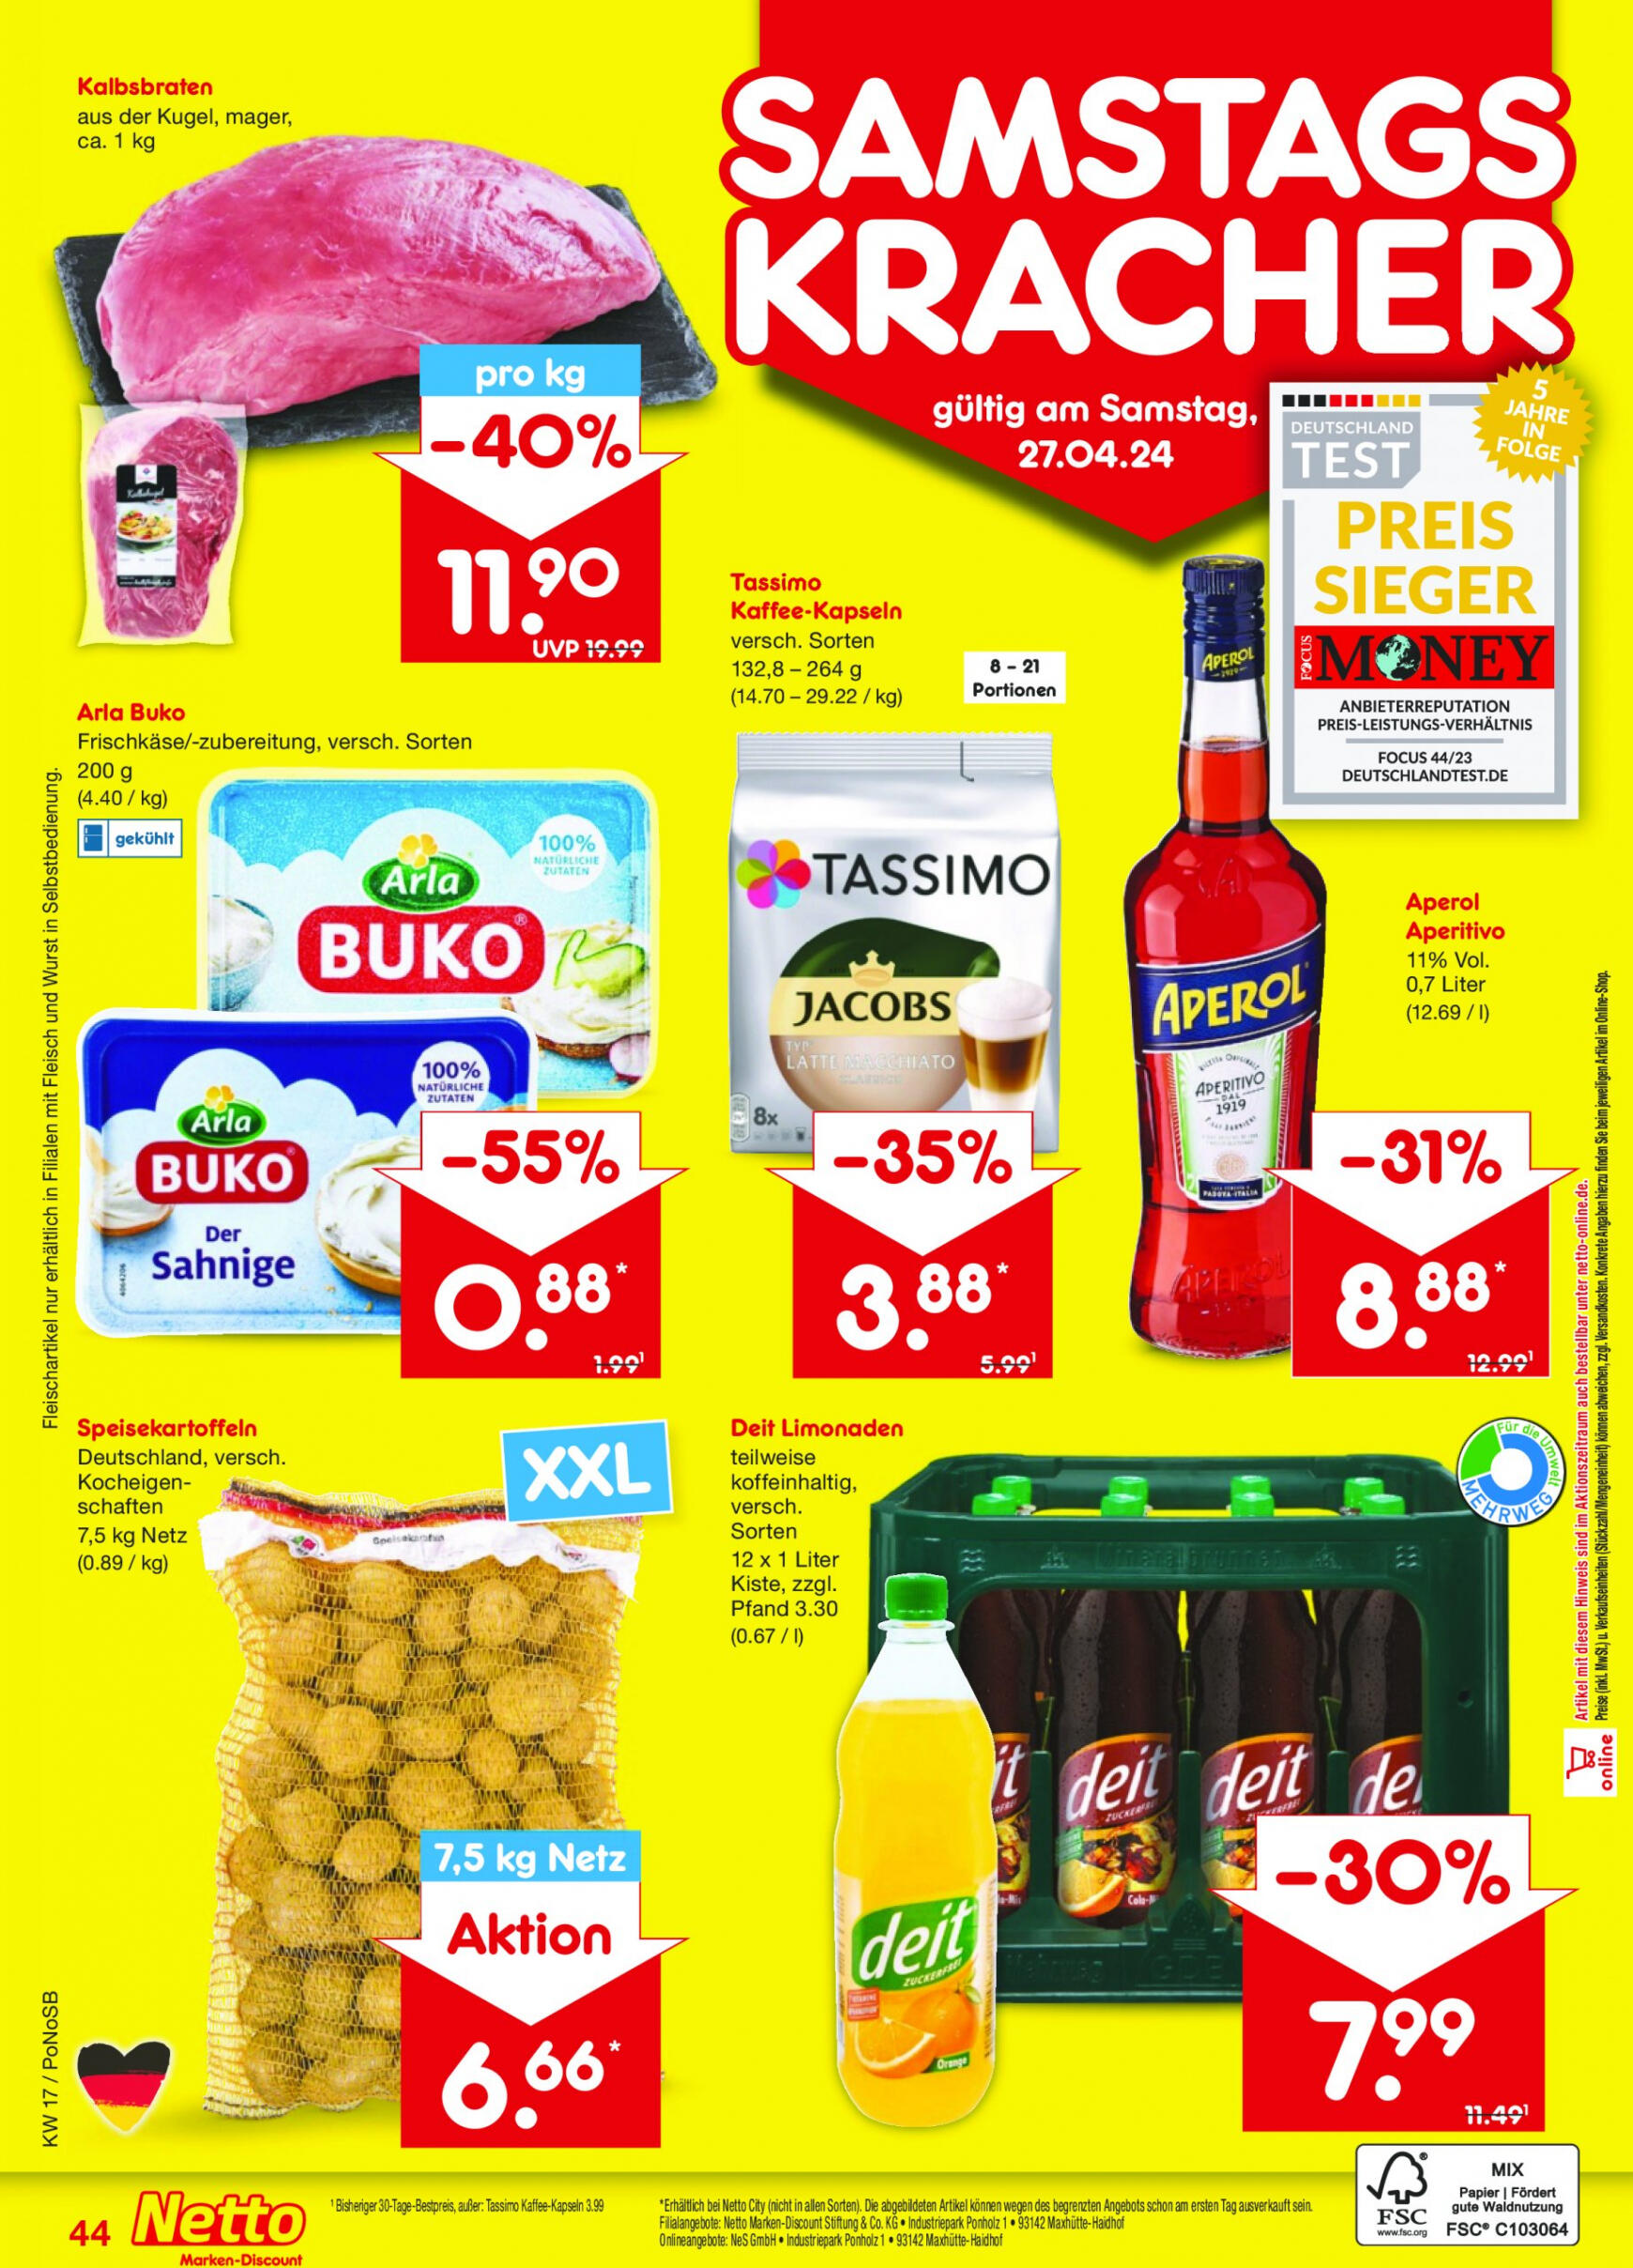 netto - Flyer Netto aktuell 22.04. - 27.04. - page: 50